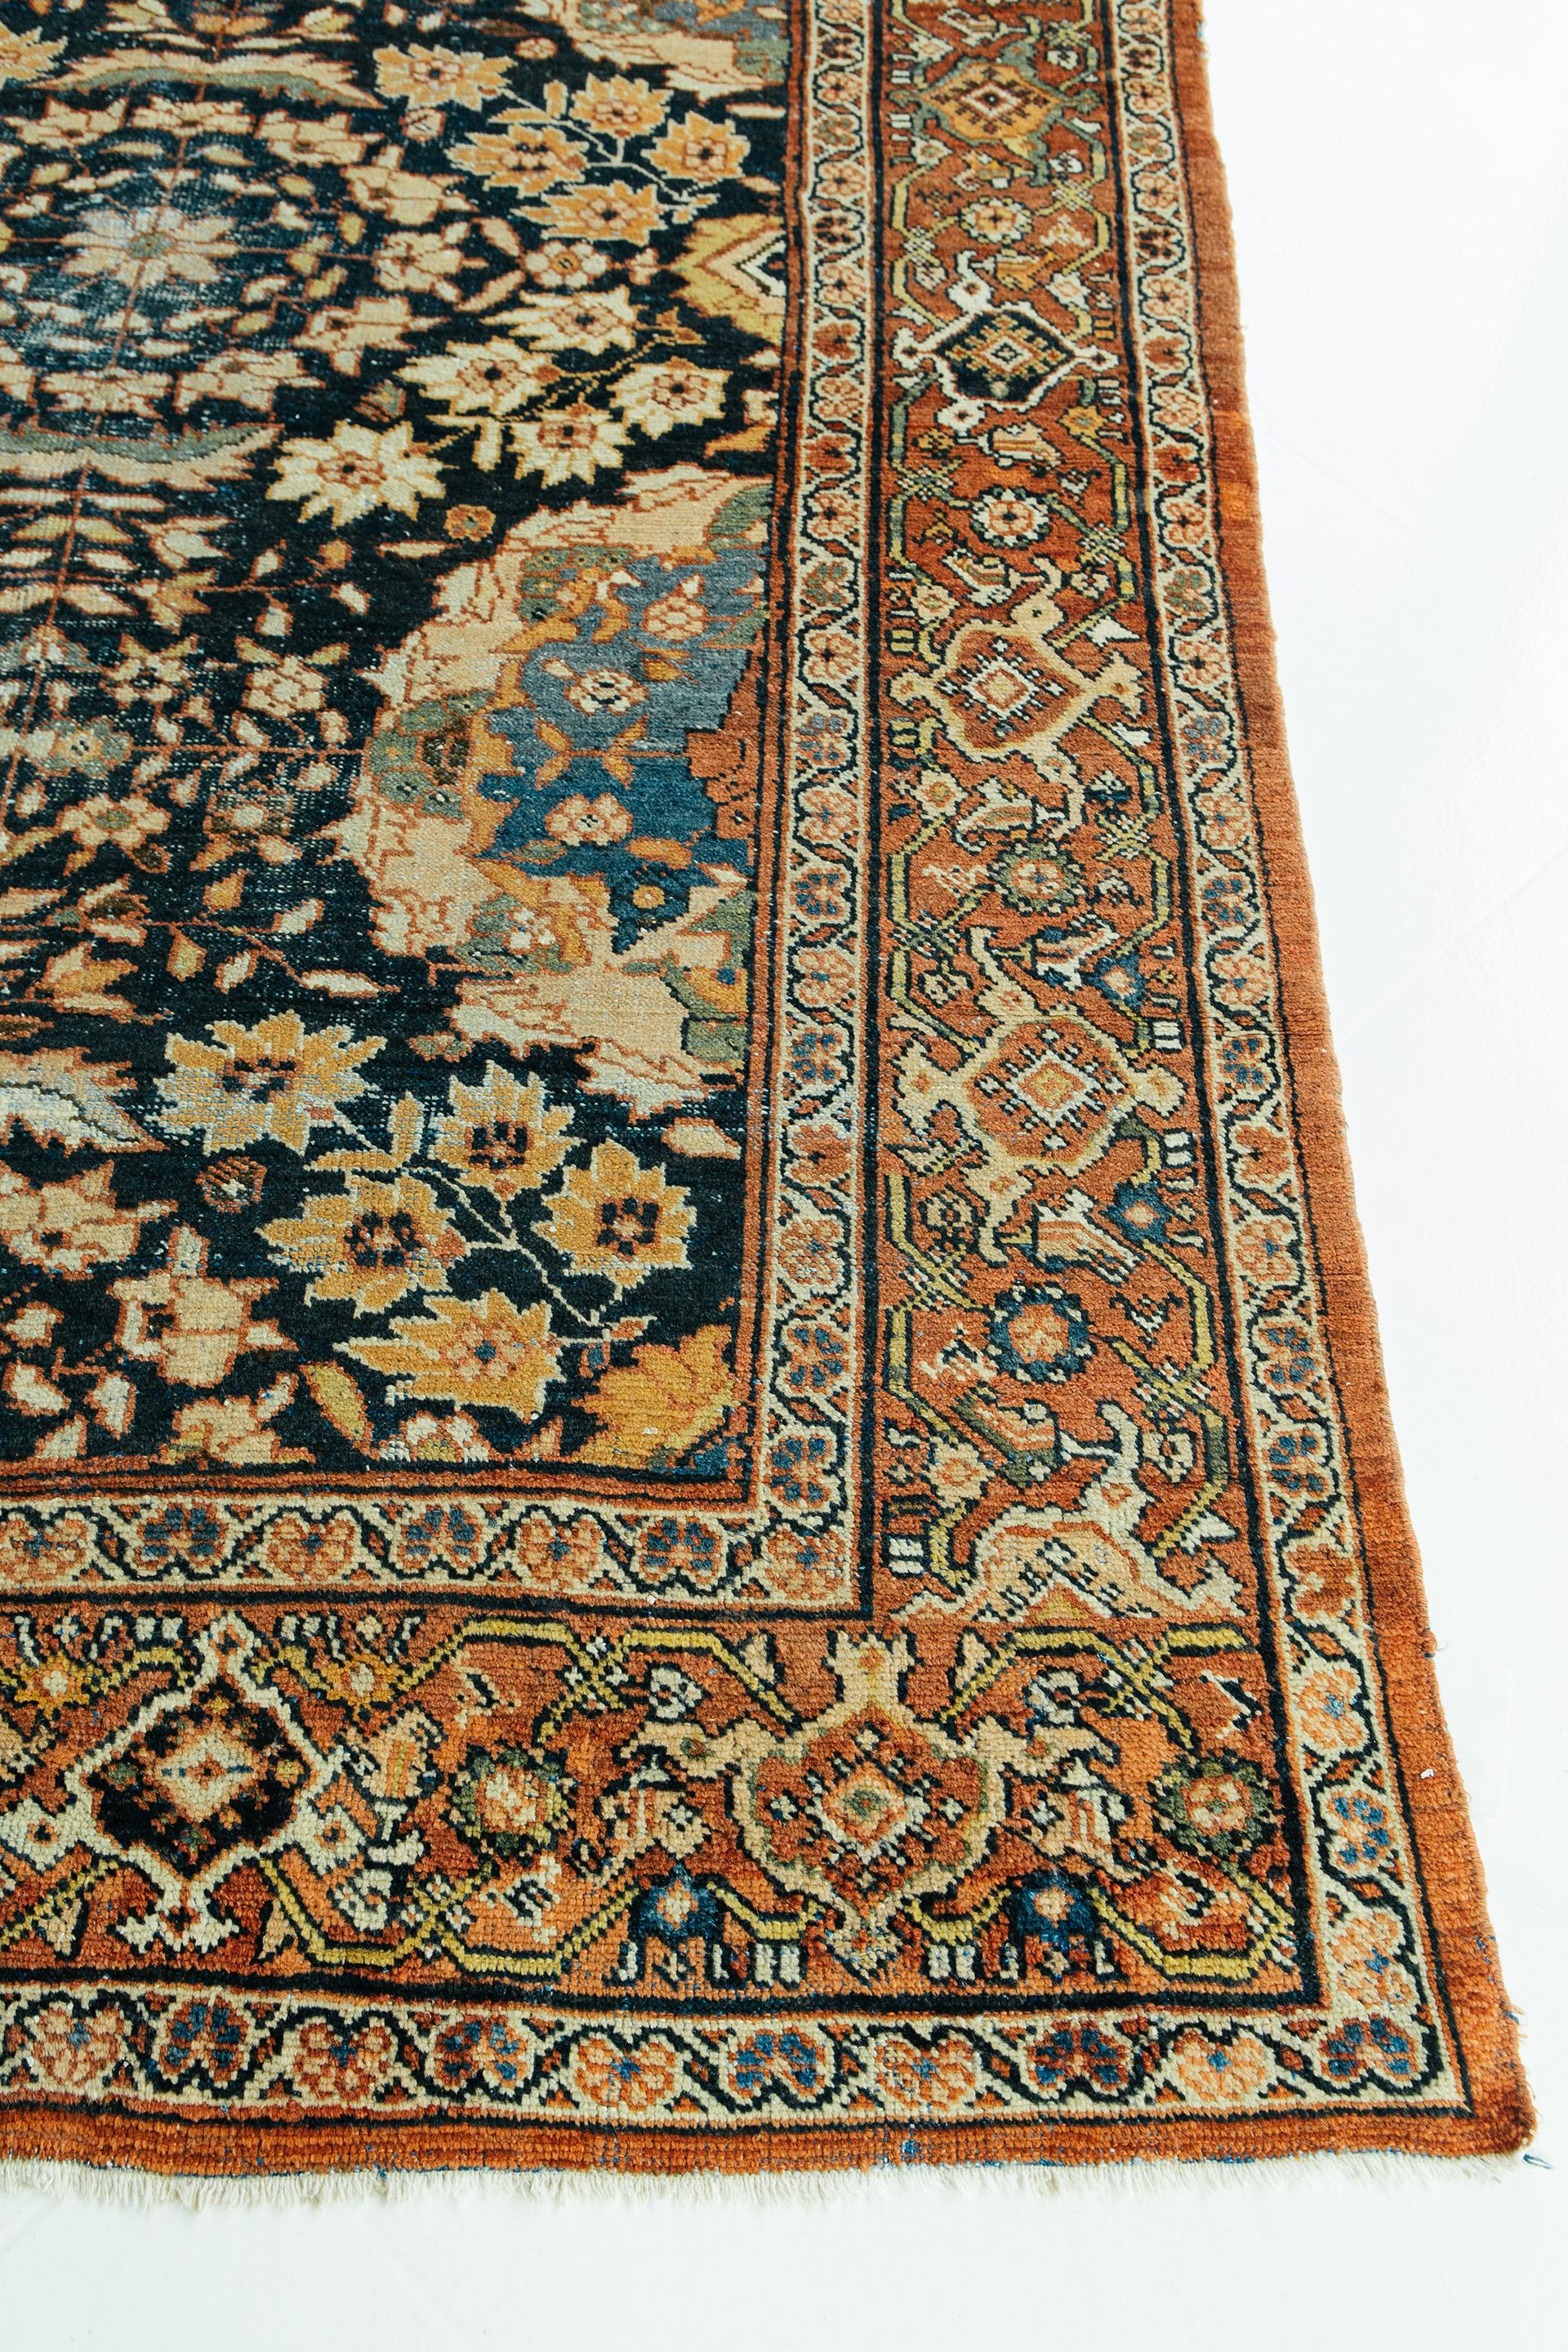 This stunning antique Sultanabad features an all-over design of alternating radial floral sprays and circular medallions against a midnight blue ground. Secondary colors include golden yellow, green, a range of blues, orange and tan. An intricate